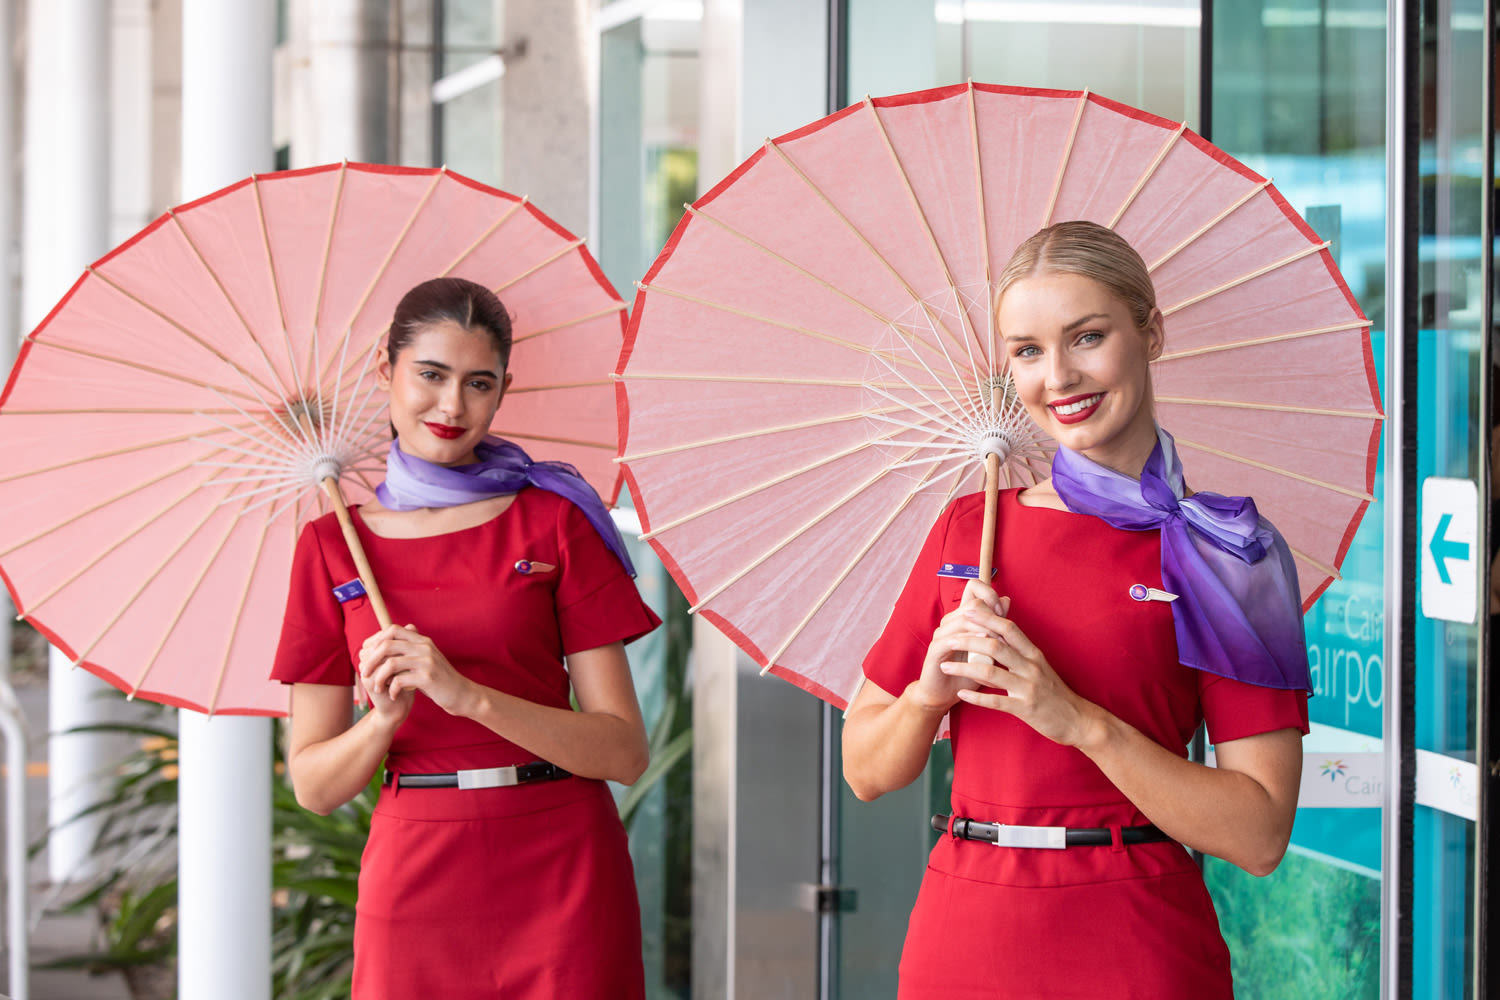 Two Virgin Australia cabin crew members holding pink and red parasols